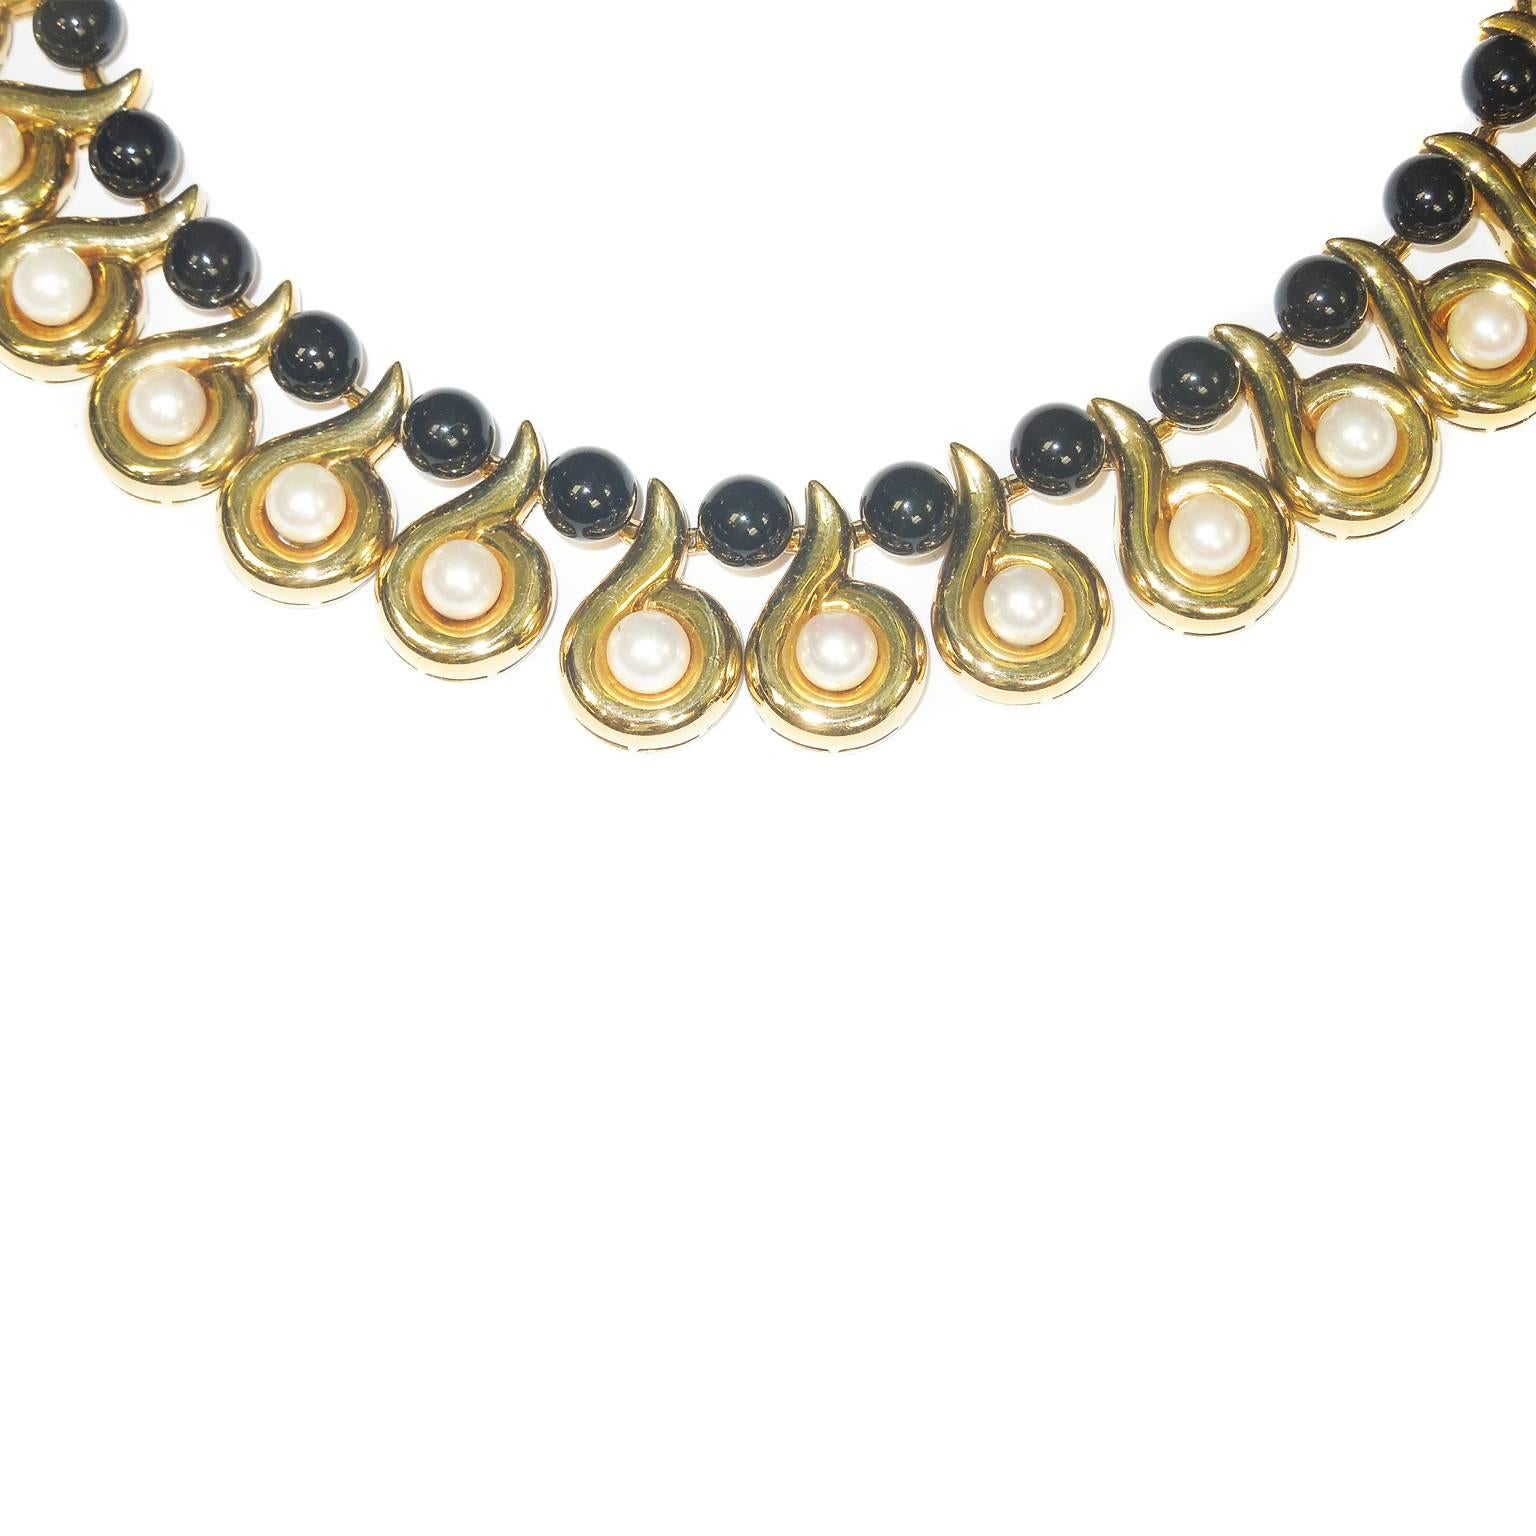 18K Gold Necklace with Cultured Pearls and Black Onyx

4mm Culture Pearls. 32 pearls total

5mm Black Onyx. 31 onyx total.

Necklace is 16 inches in length. 0.8 inch width

Screw in clasp used.

145 grams 18K Gold

ESTATE